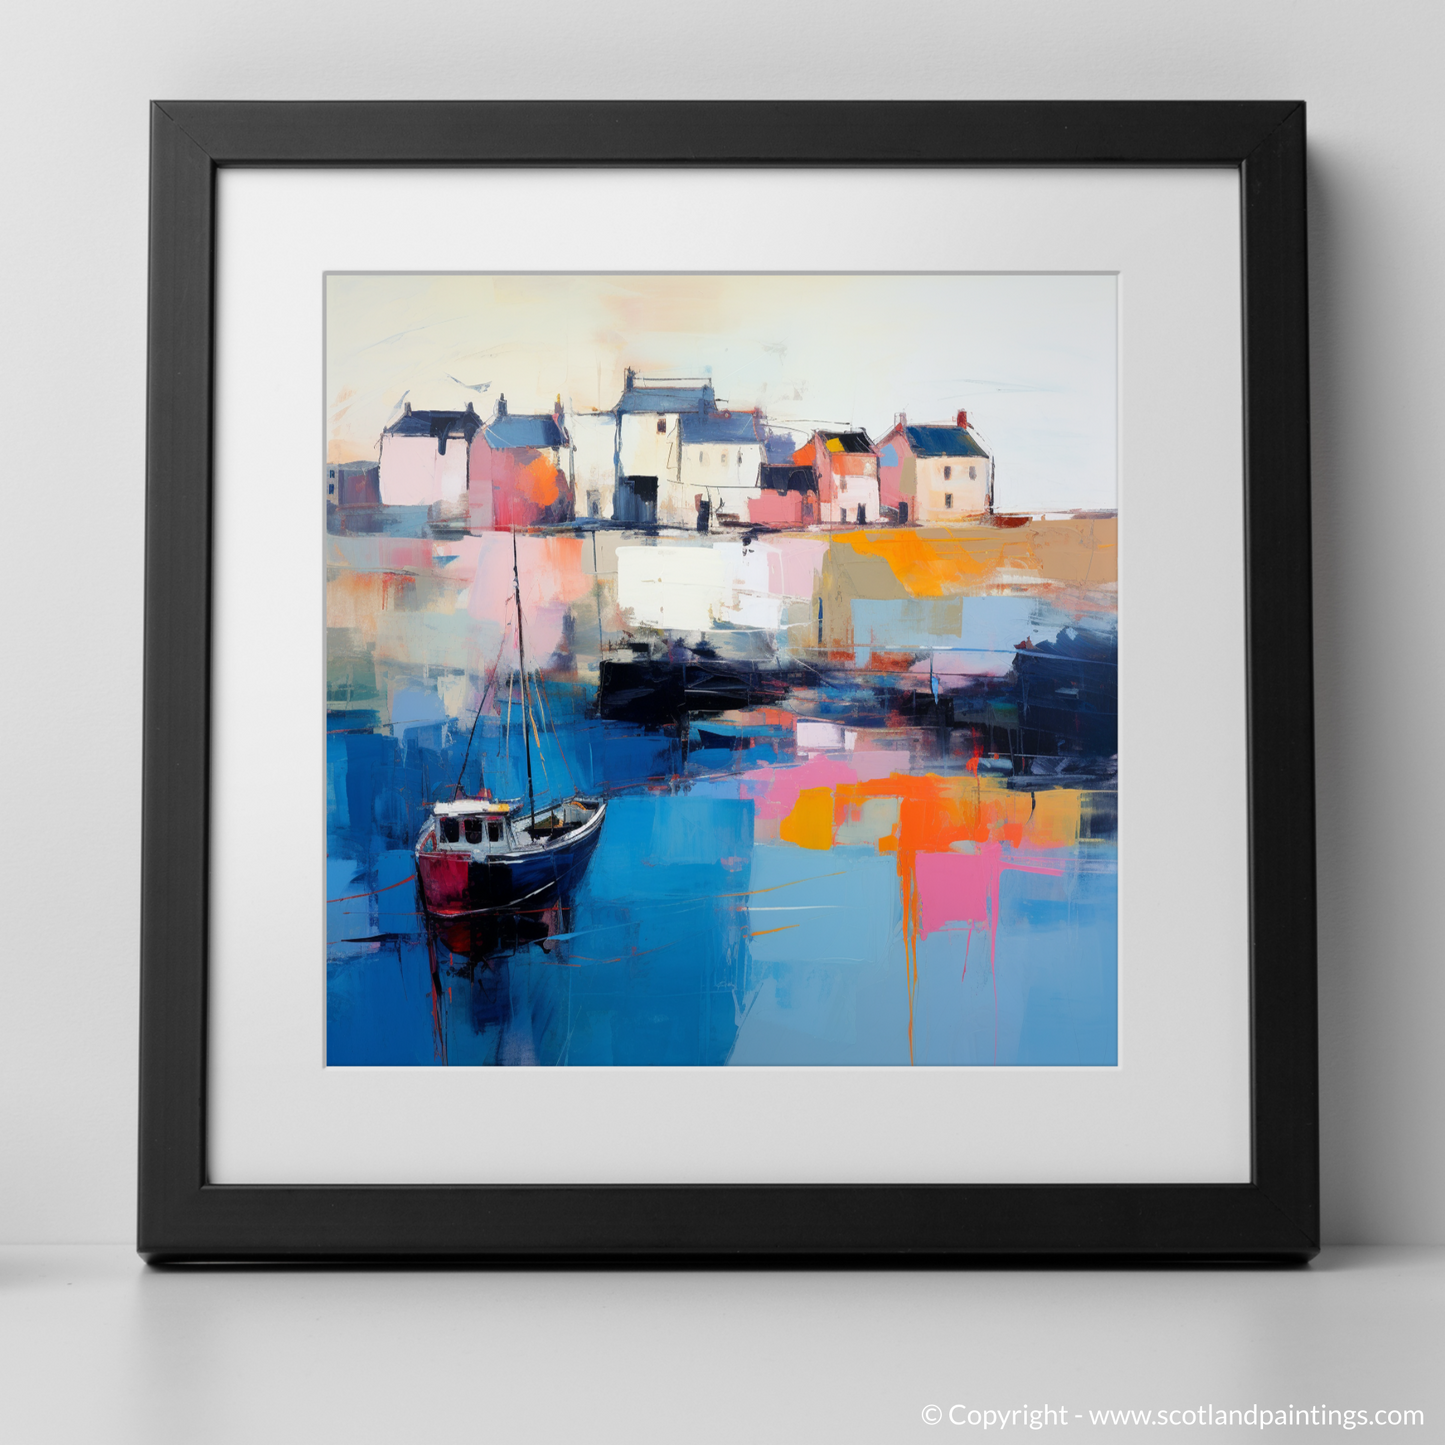 Pittenweem Harbour at Dusk: An Abstract Symphony